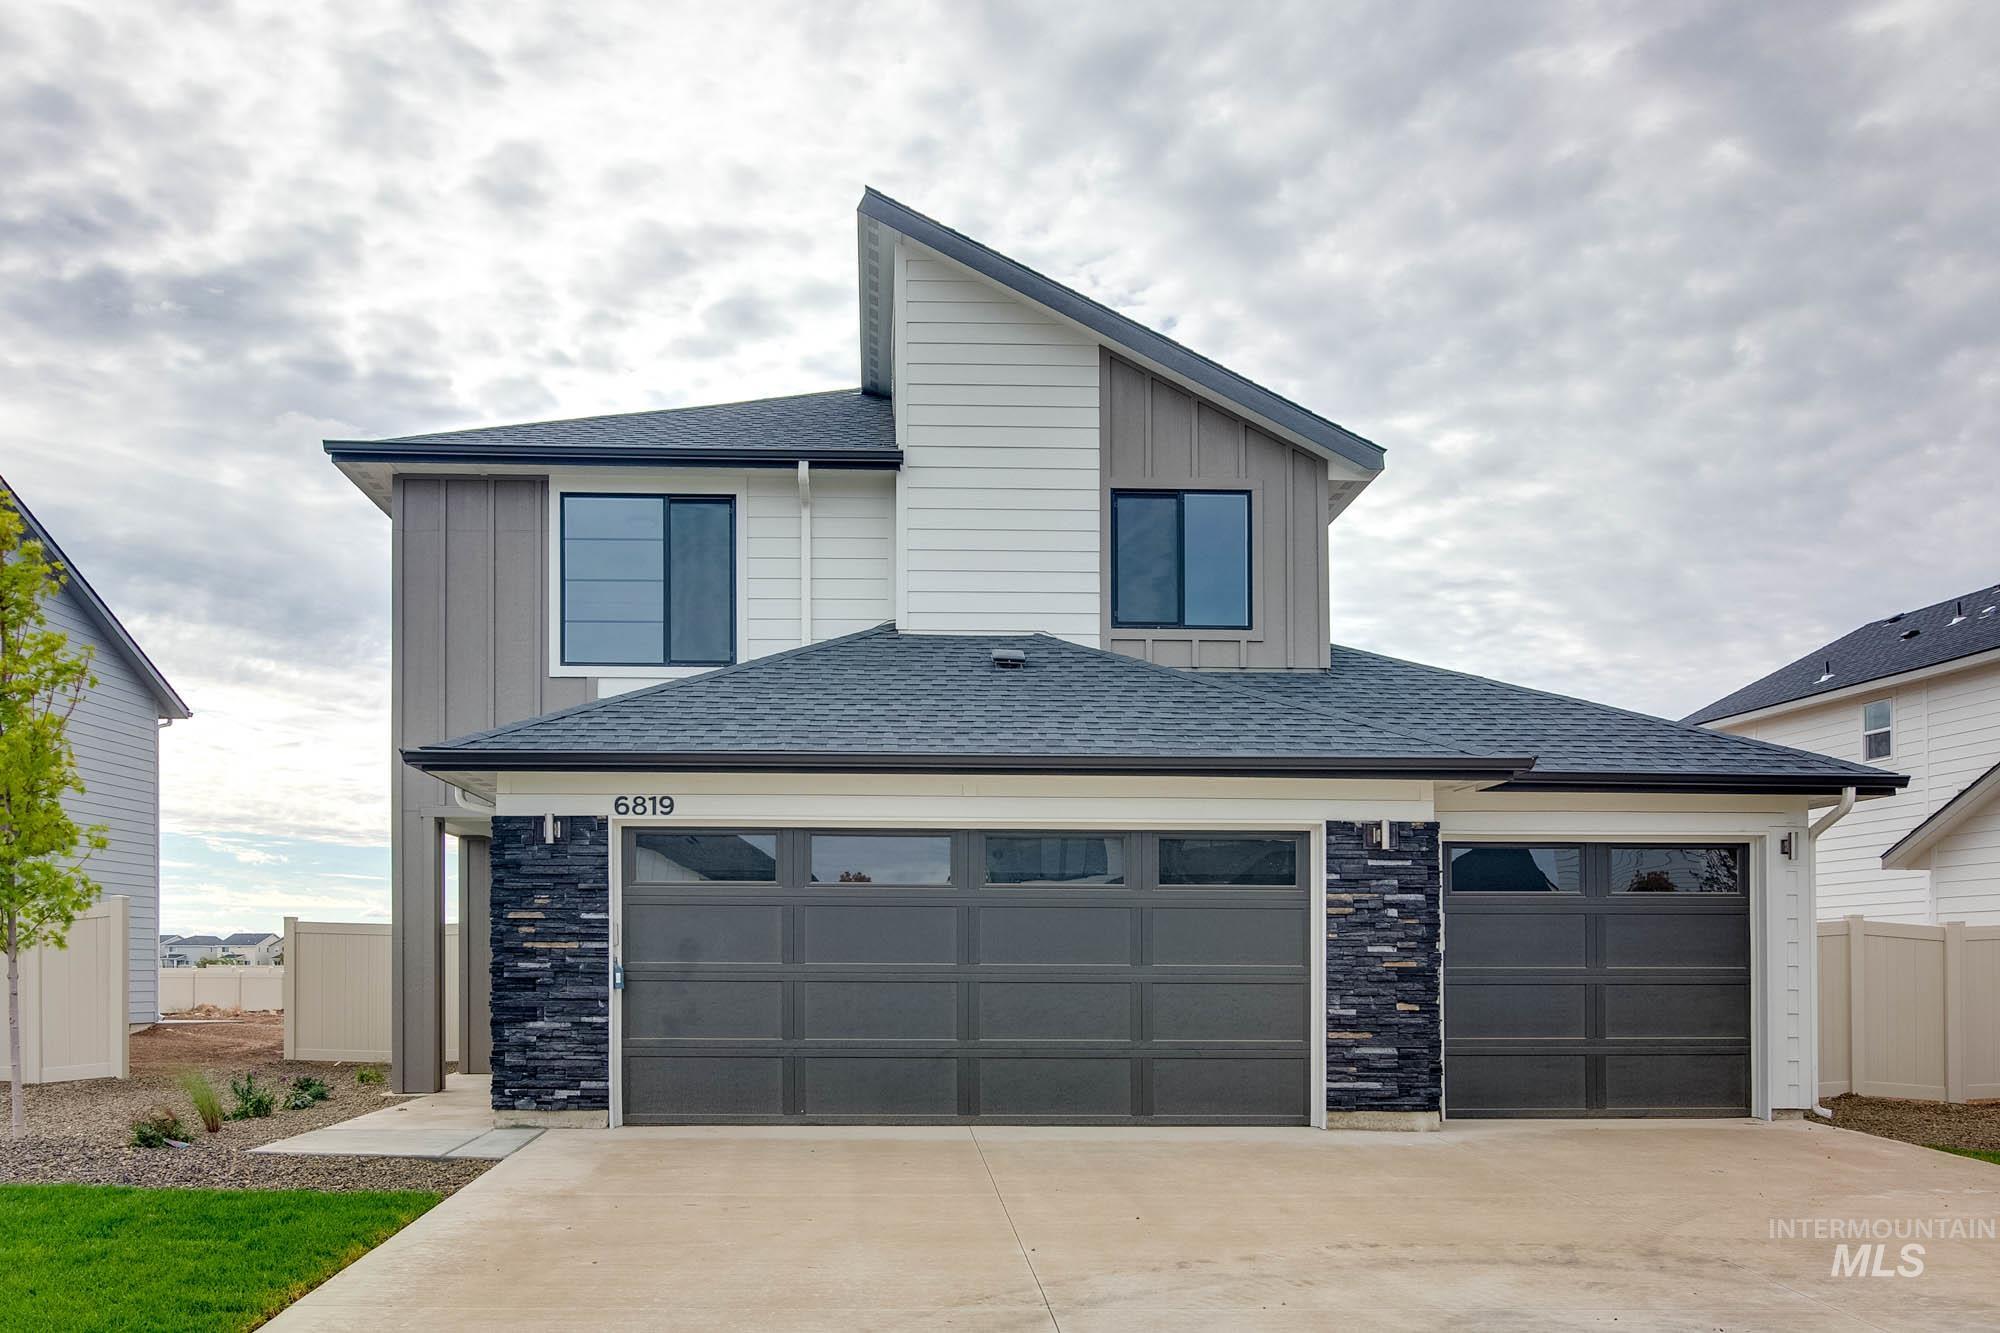 12728 Abbeygate Dr, Nampa, Idaho 83651, 4 Bedrooms, 2.5 Bathrooms, Residential For Sale, Price $429,990,MLS 98906846